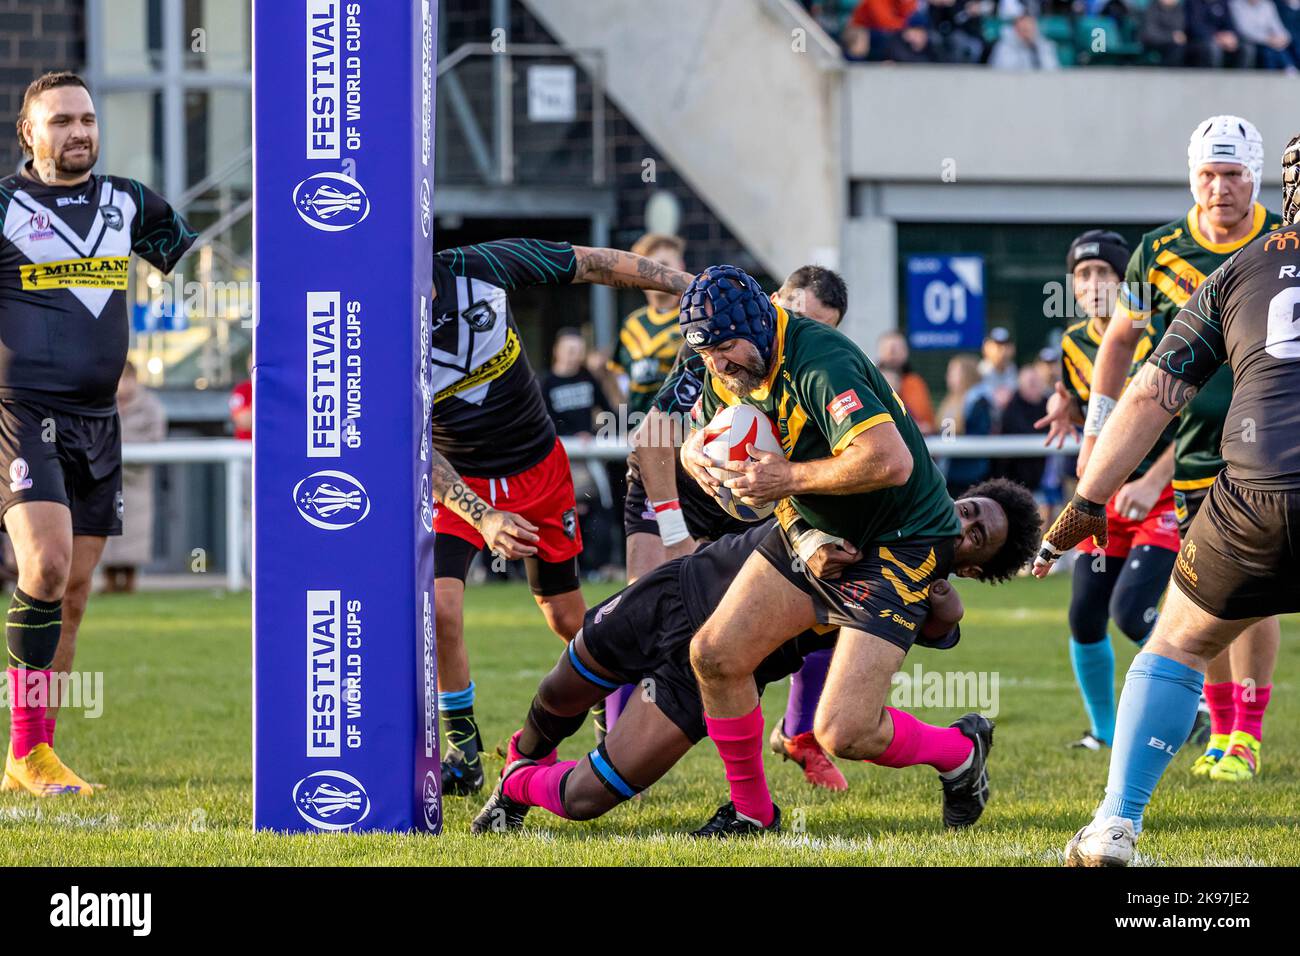 2022 Physical Disability Rugby League World Cup at Victoria Park, Warrington. Australia took on New Zealand. Autralian runs through a tackle to score Stock Photo